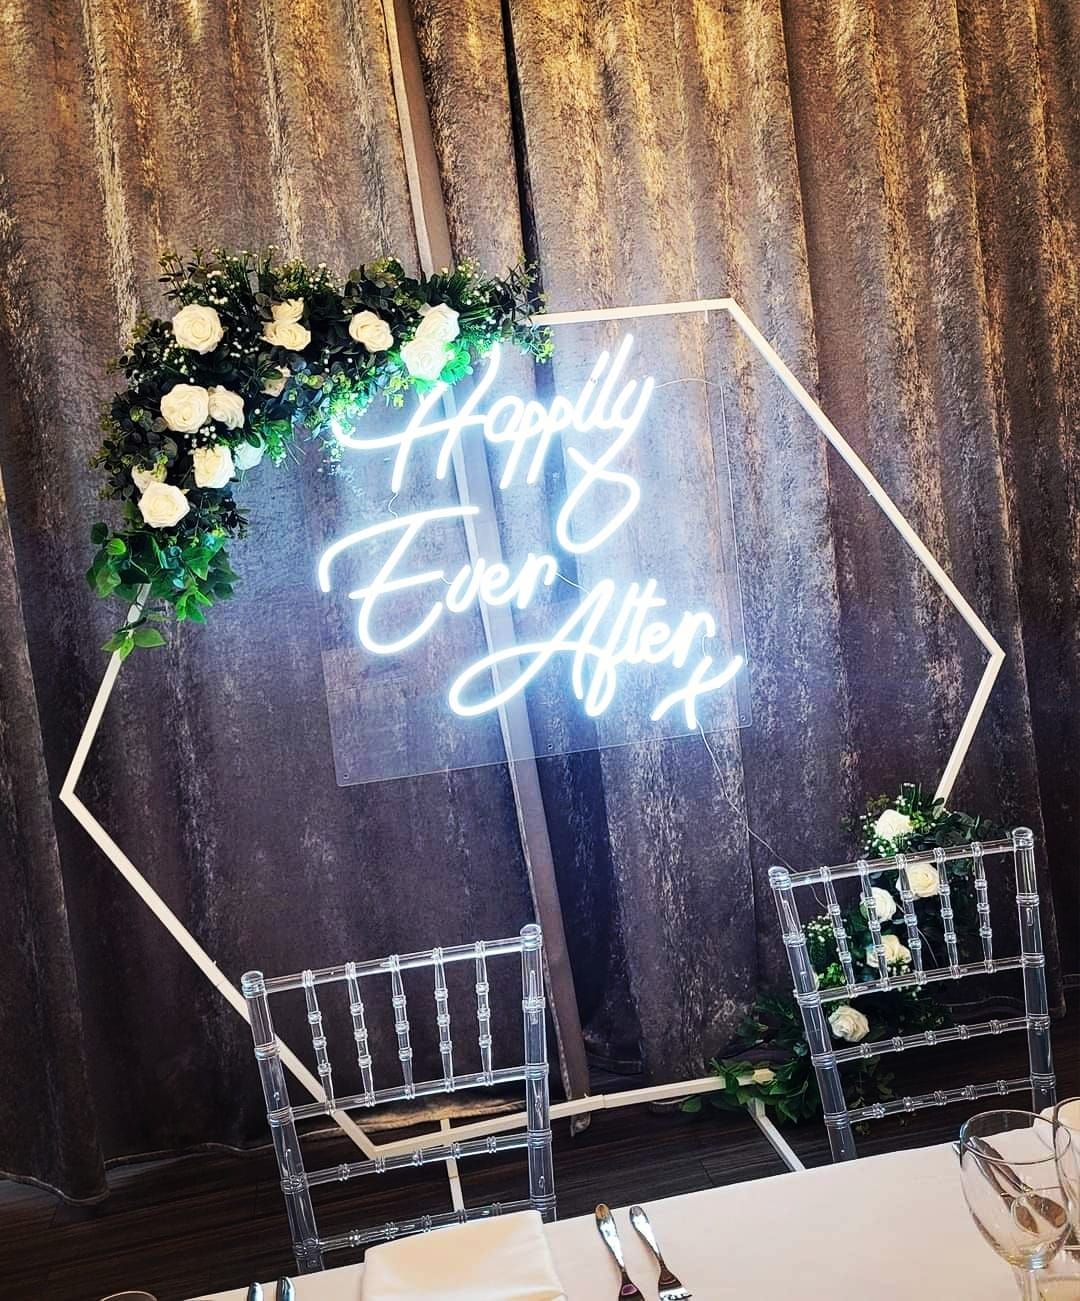 Happily ever after neon sign on hexagon shaped frame